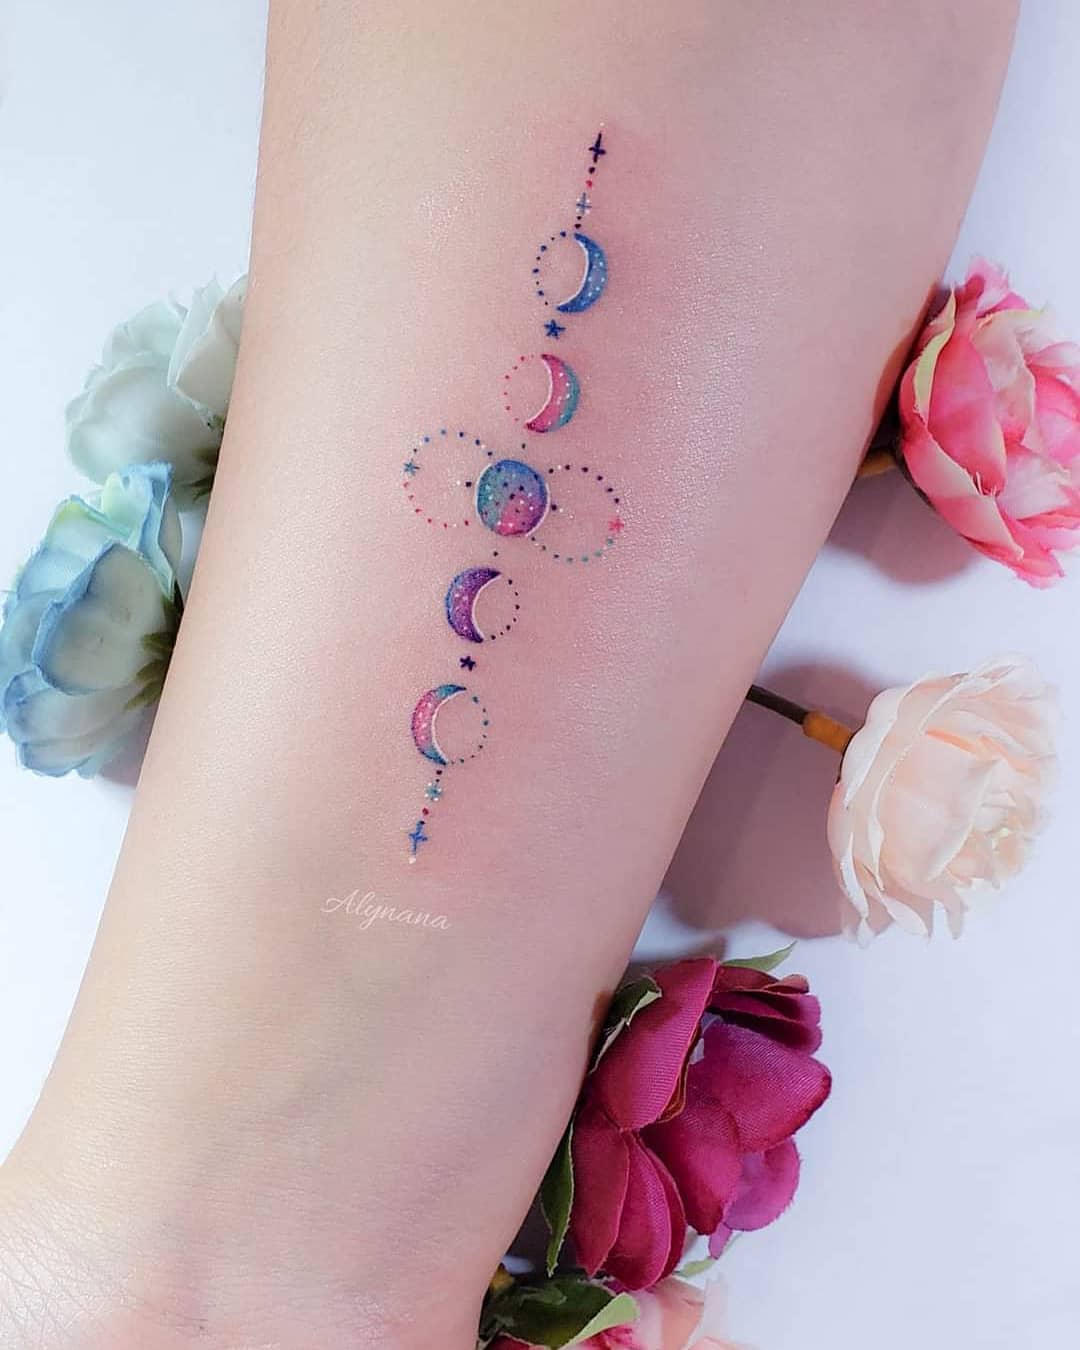 157 Delicate Colorful Tattoos Artist Alynana Lunar Phases with small dots and stars on forearm